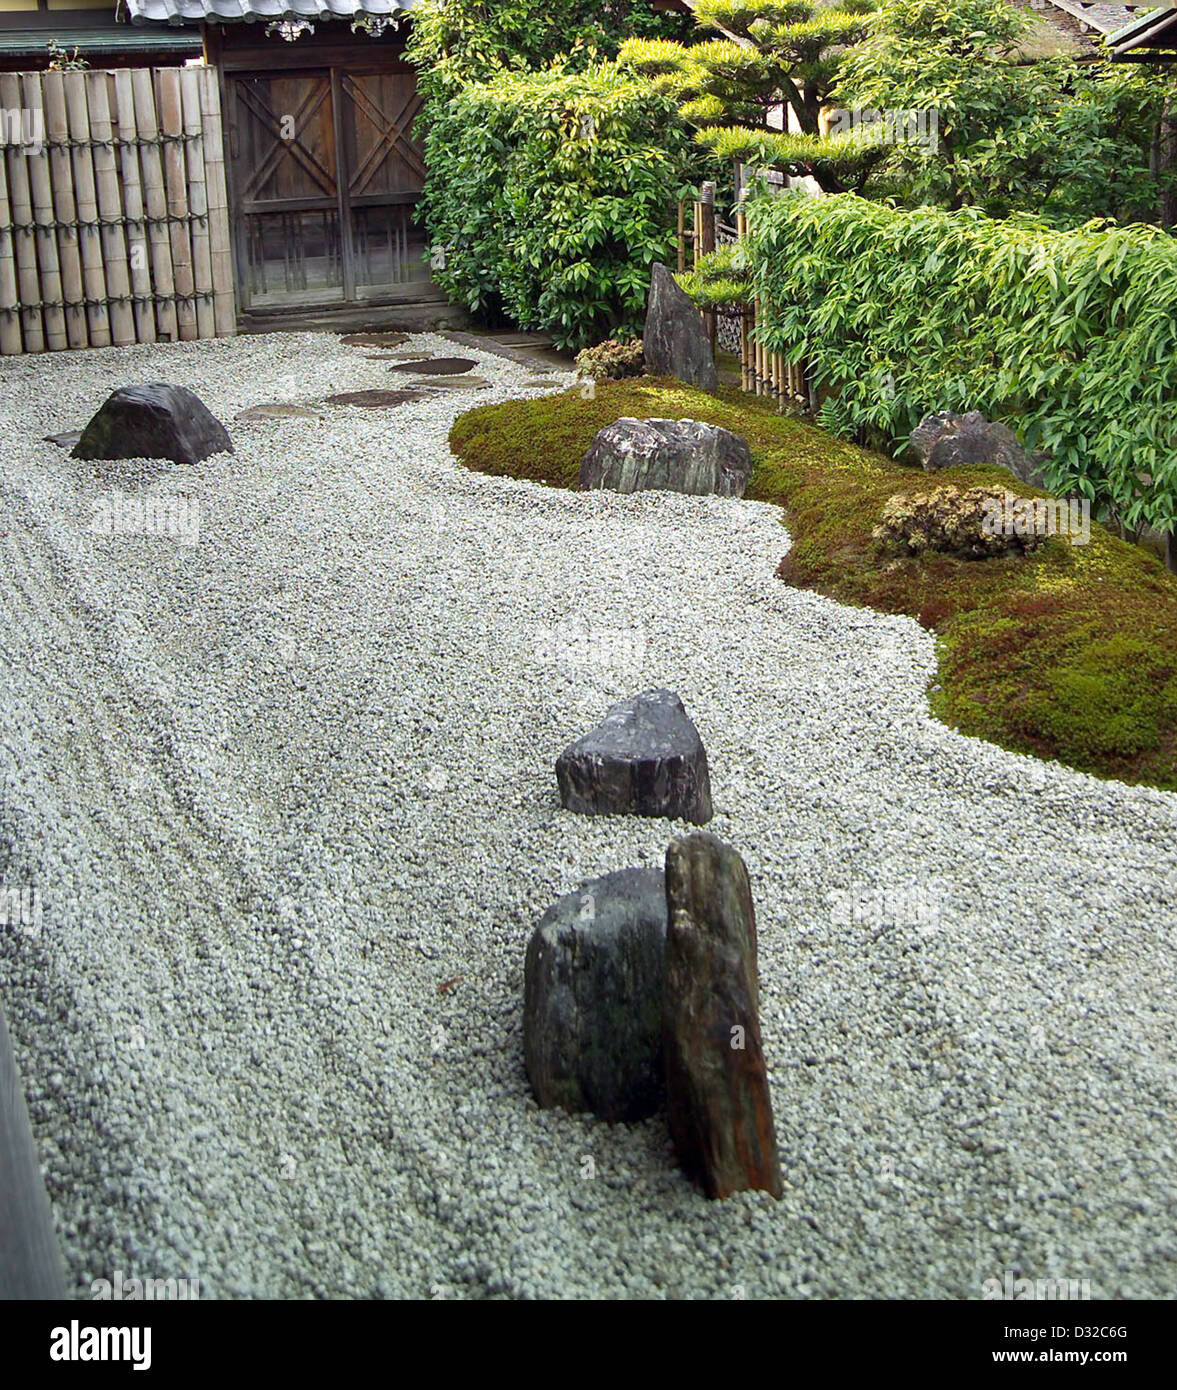 Garden of the Cross at Zuiho-in, a subsidiary temple of Daitoku-ji, Kyoto, Japan. Stock Photo